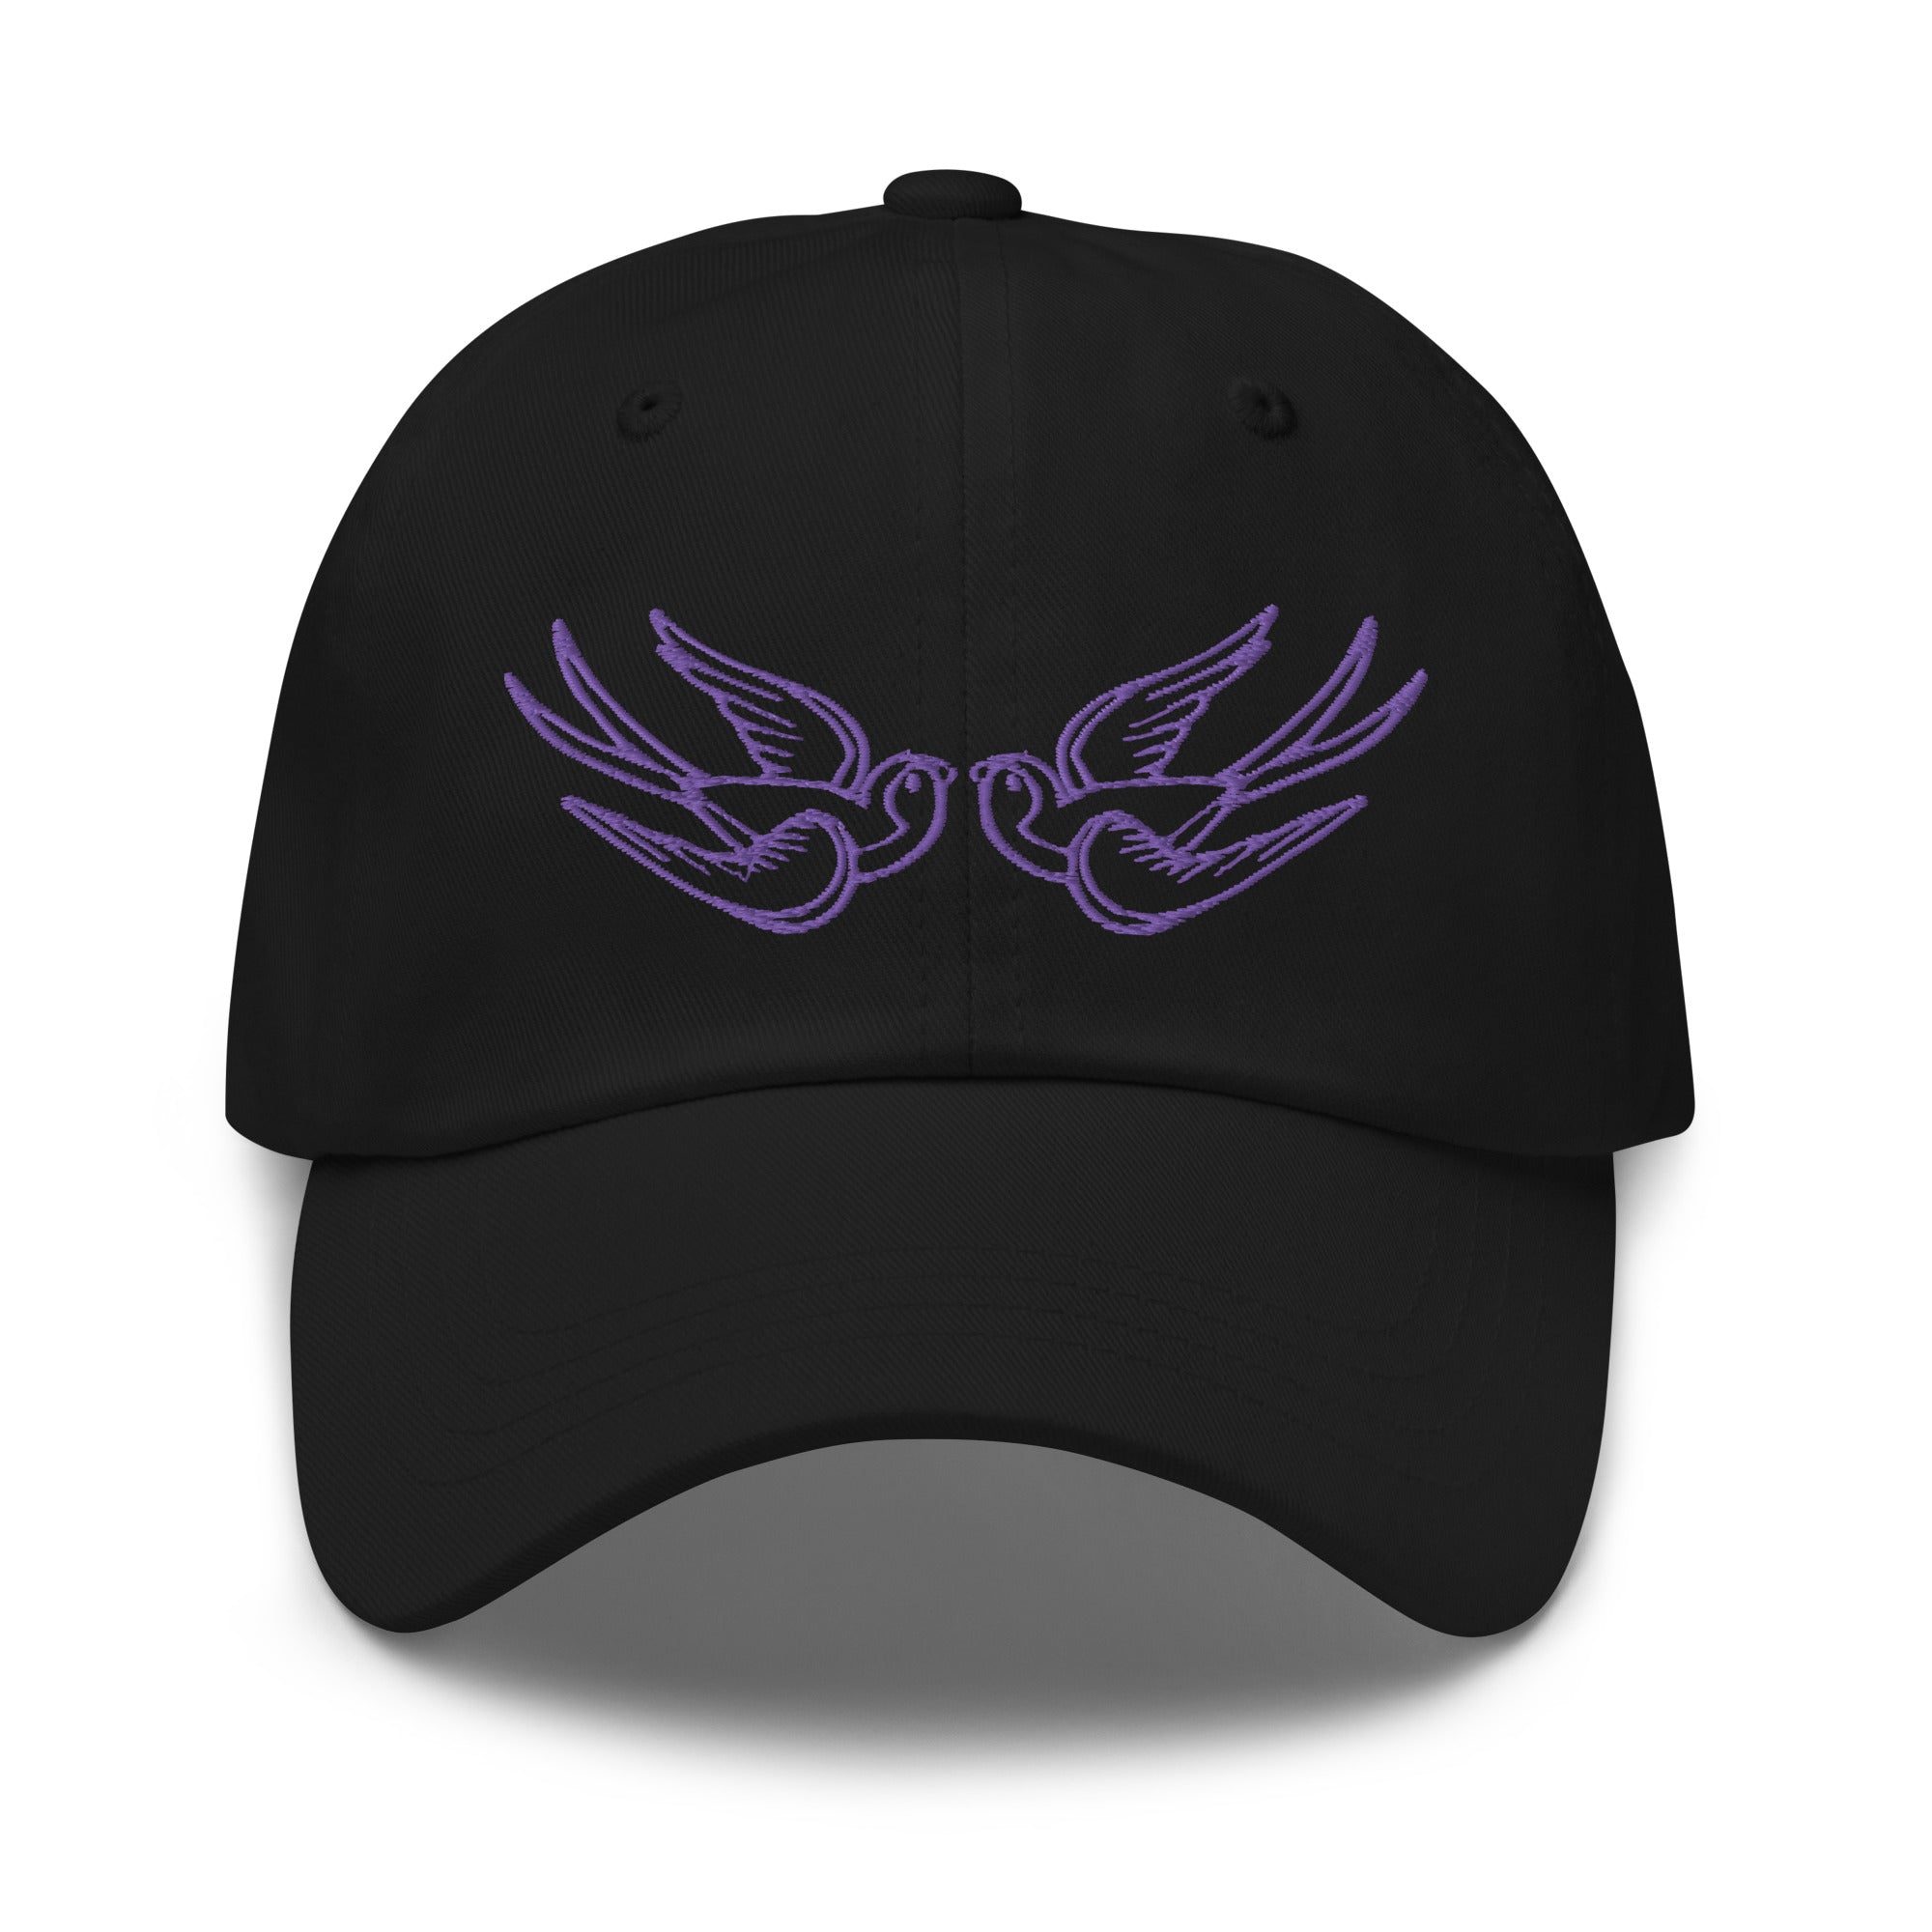 Falling Sparrows Tattoo Style Bird Embroidered Baseball Cap Dad hat - Edge of Life Designs